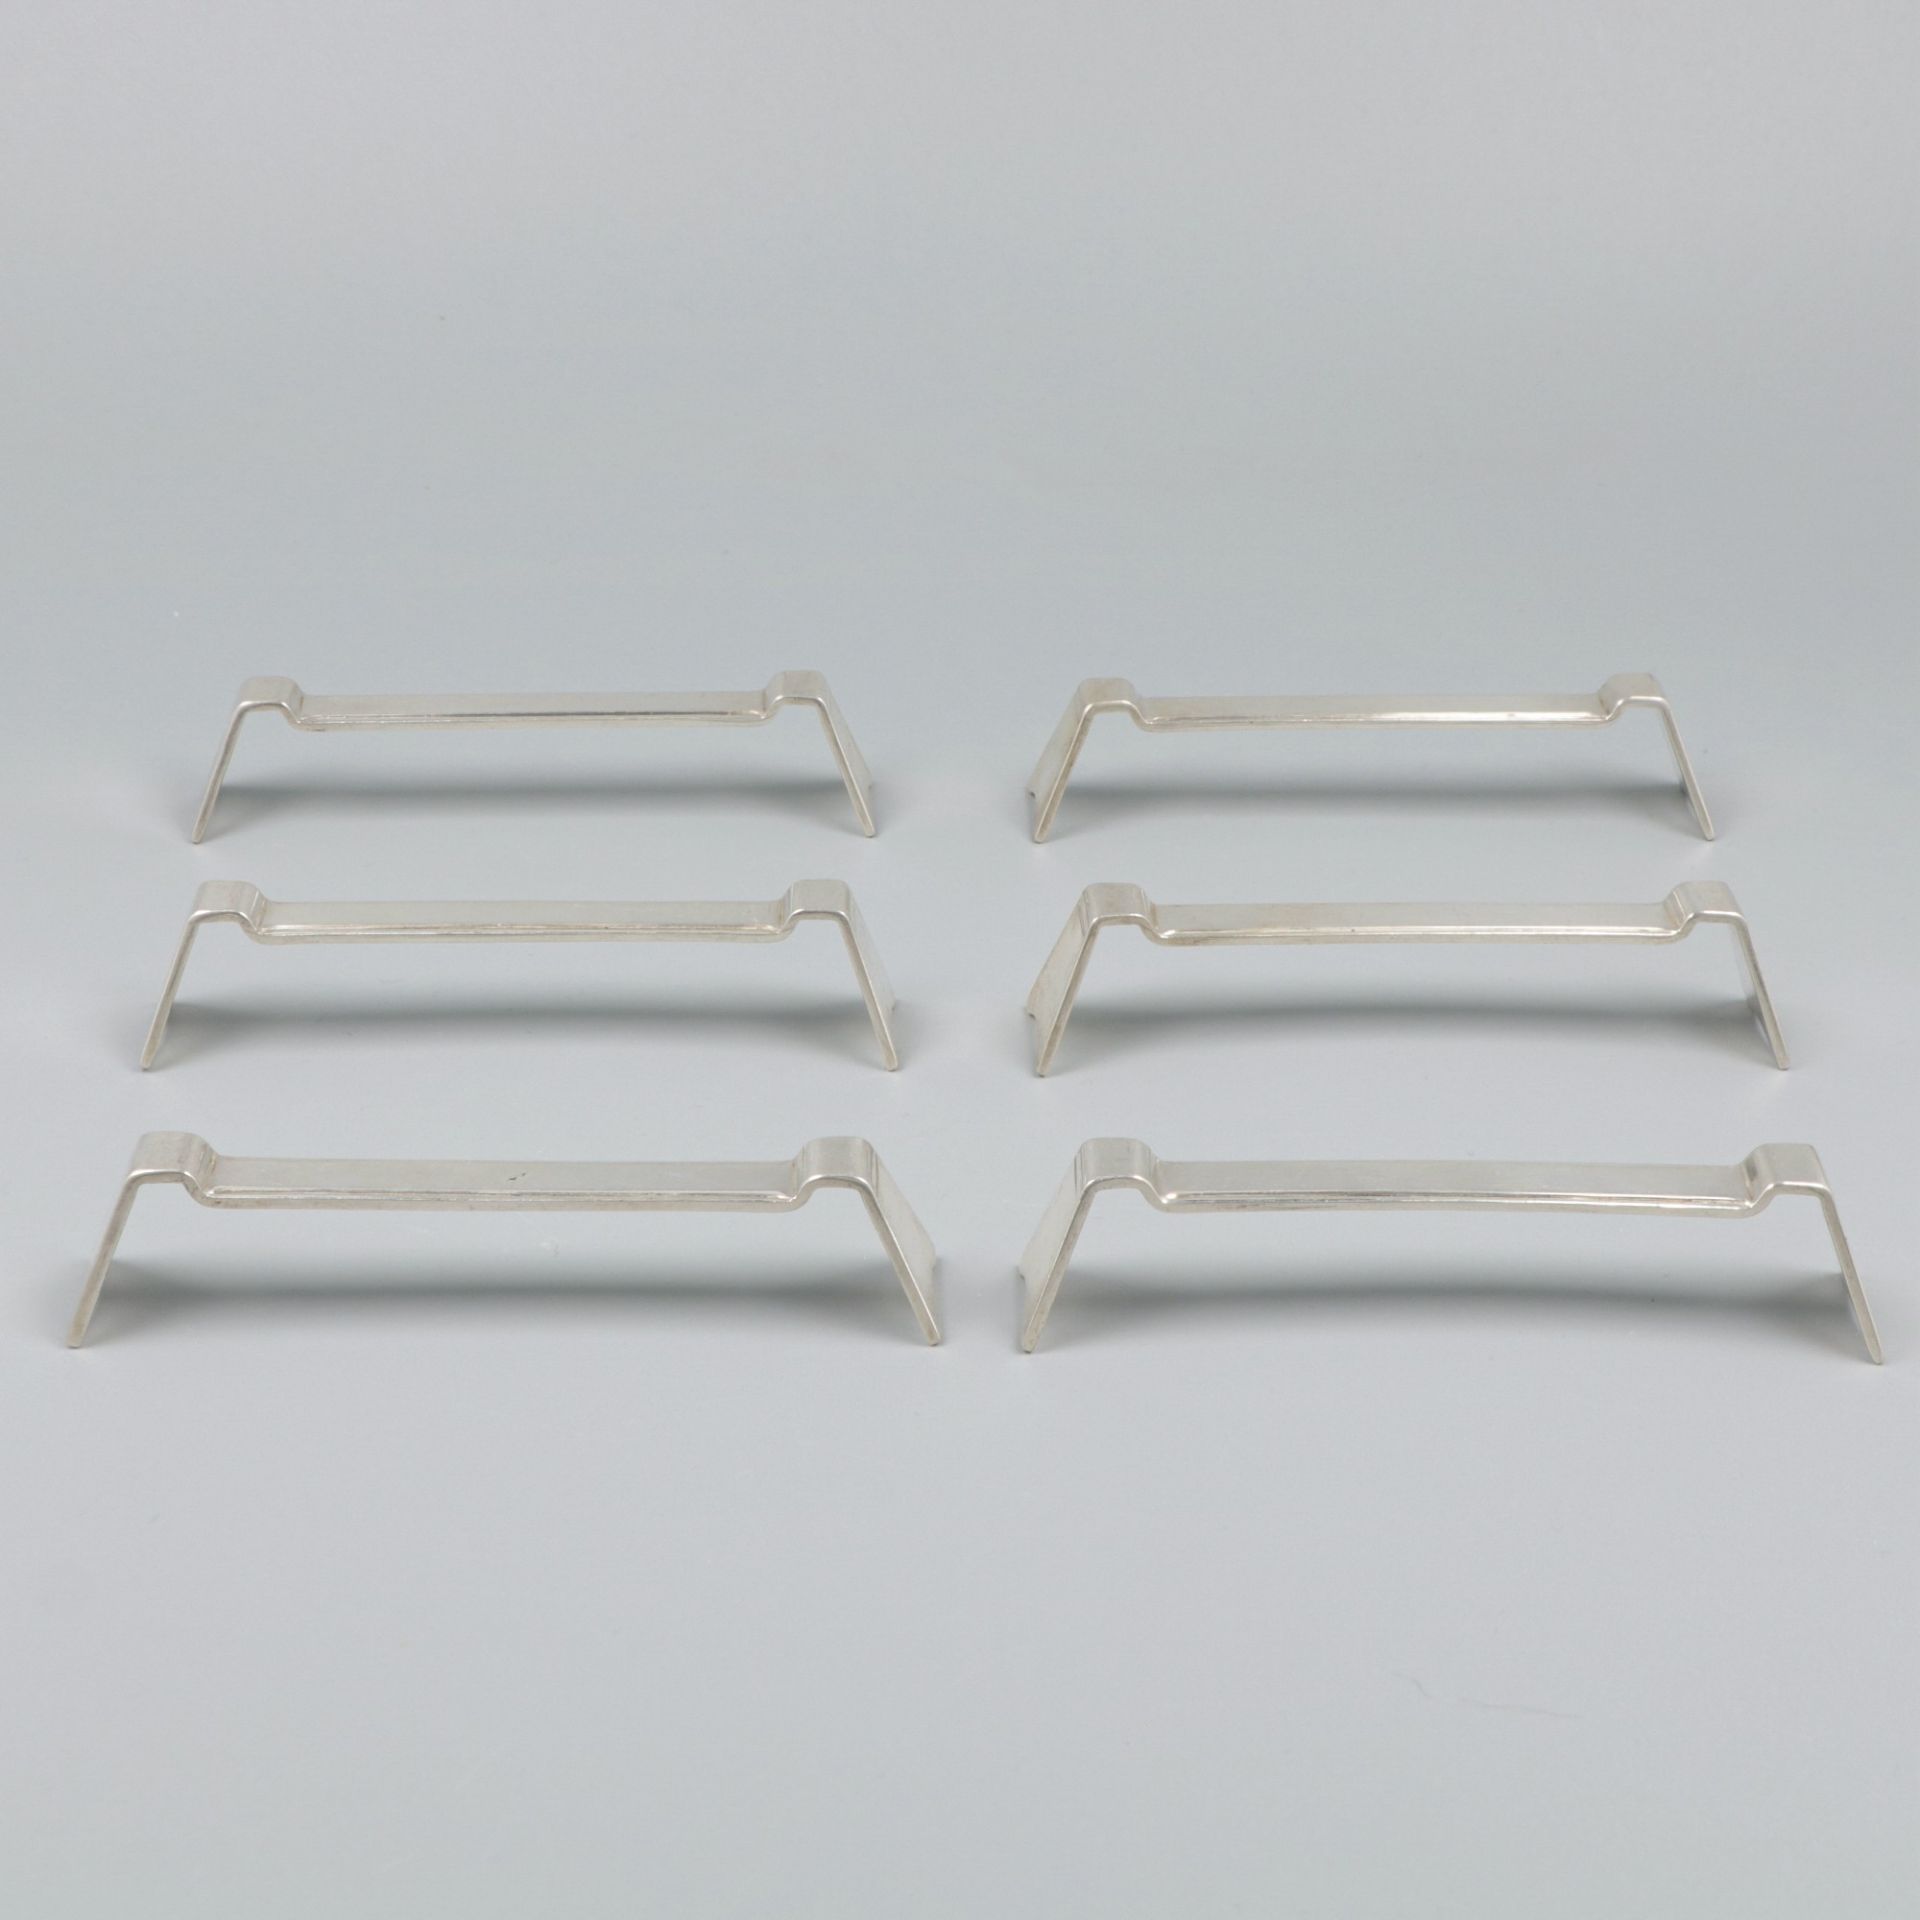 6-piece set of silver knife rests.